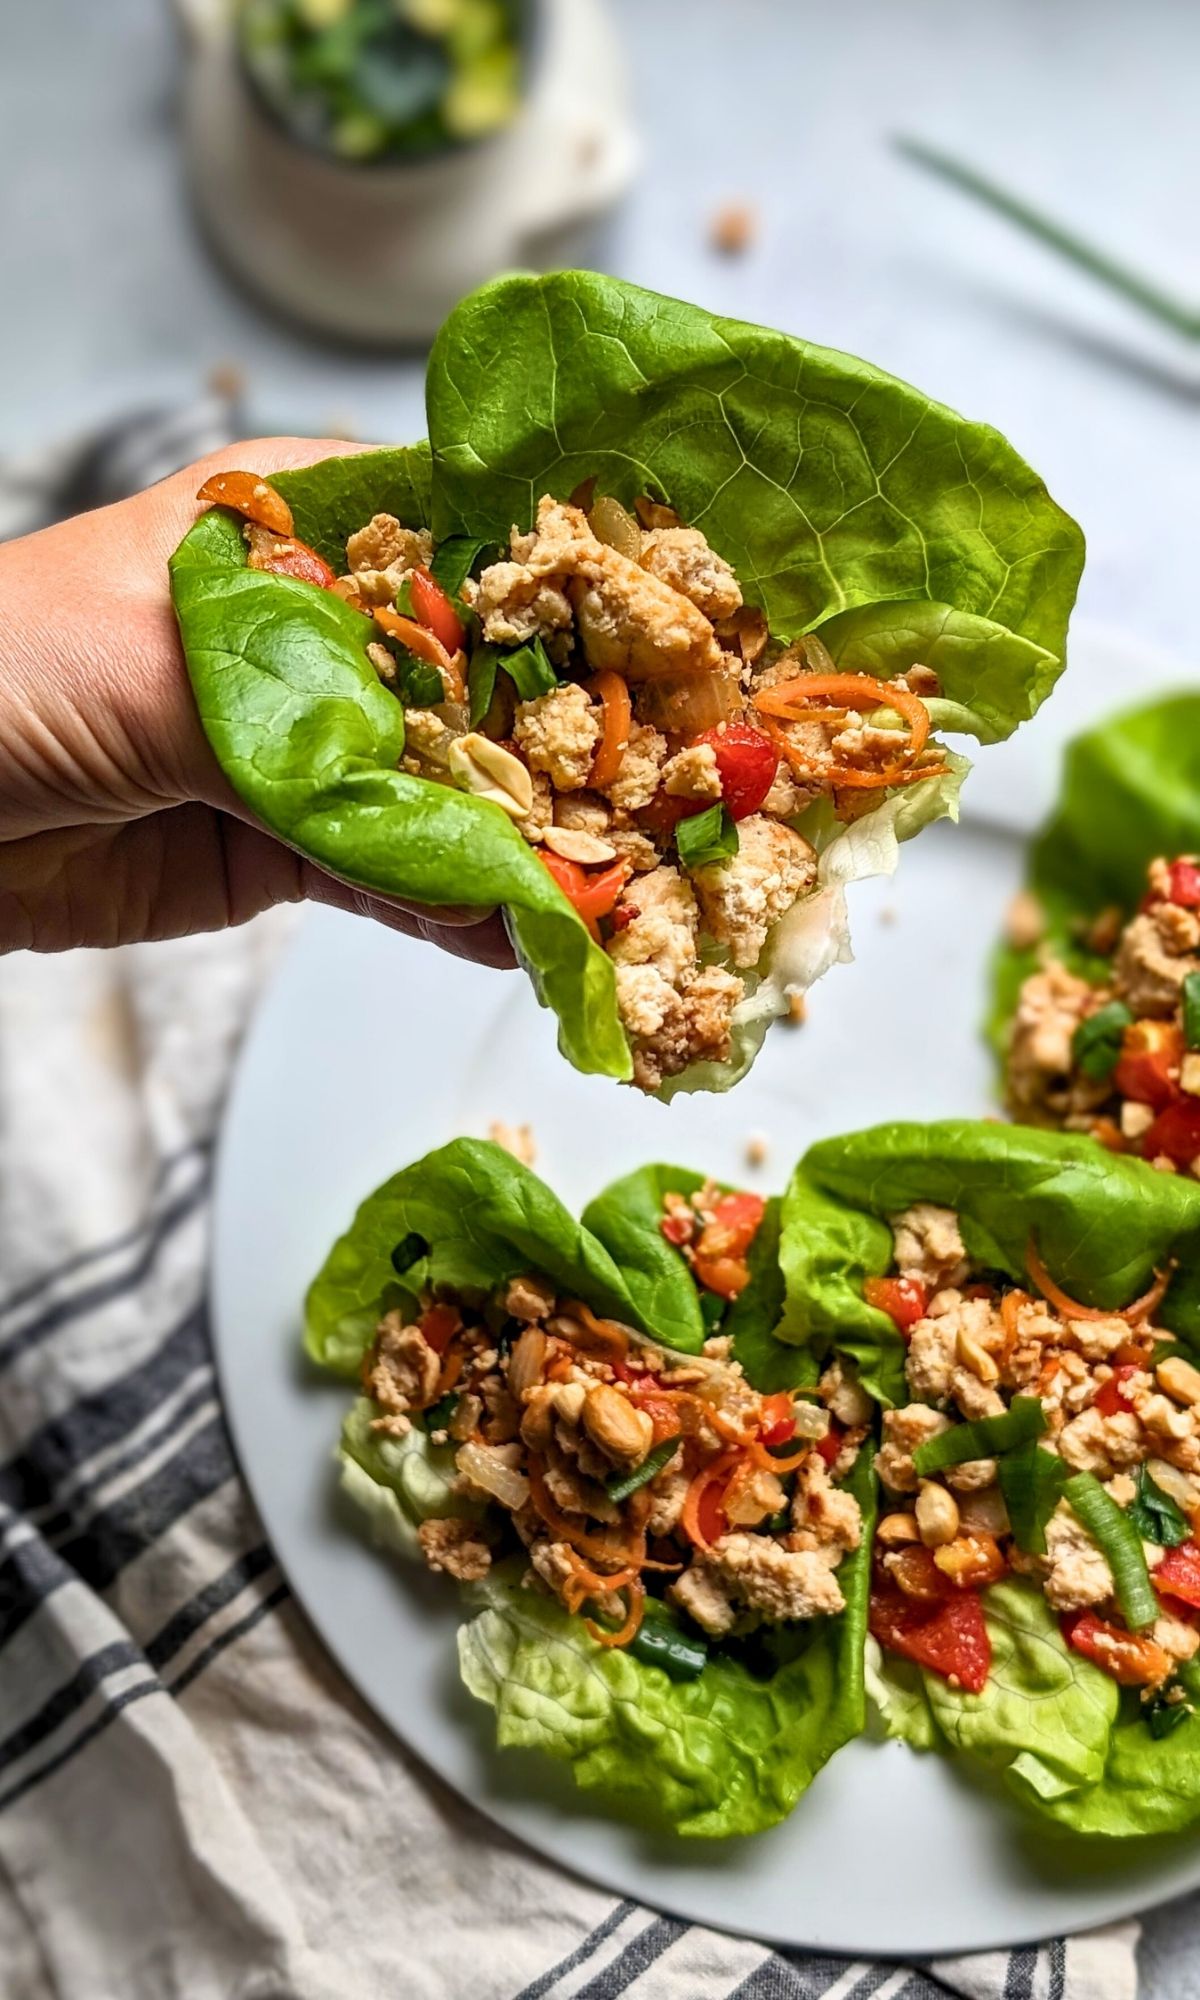 low salt lettuce chicken cups recipe with ground chicken breast fresh vegetables served in boston lettuce or bib lettuce cups